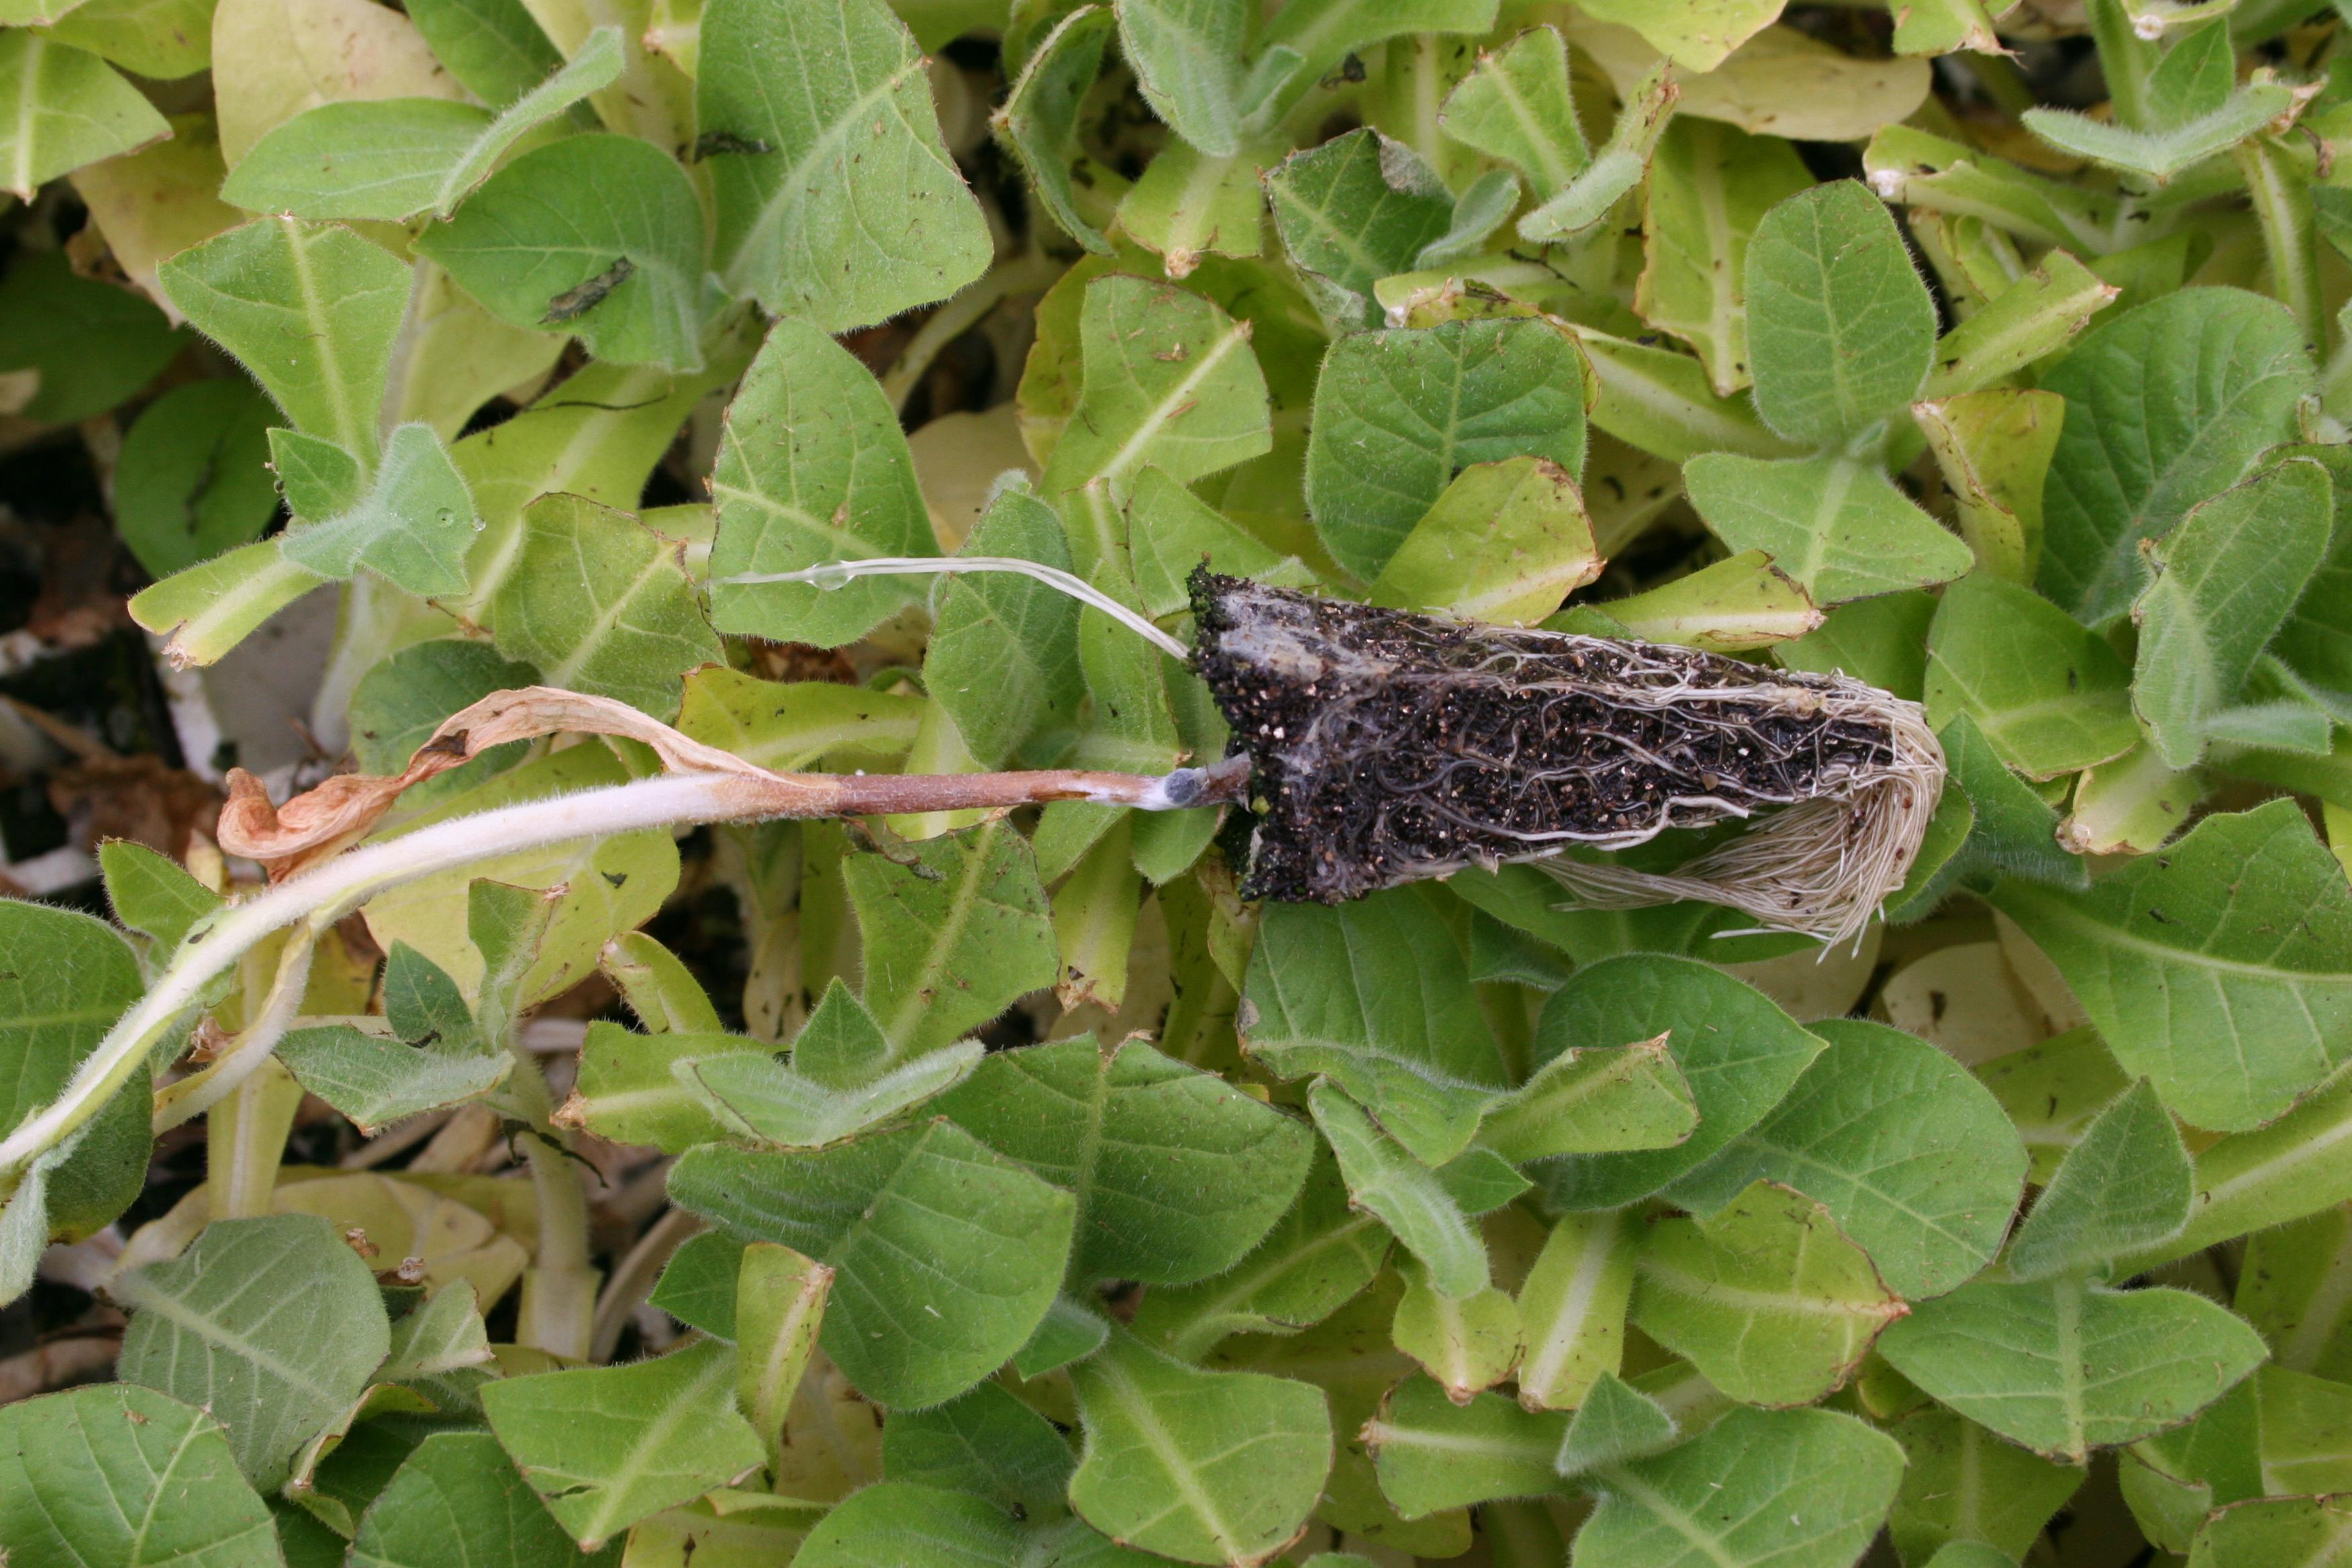 Note the small black sclerotium that has developed on the lower stem of this tobacco transplant.  Sclerotia are capable of surviving several years of unfavorable environmental conditions. Once favorable conditions resume, sclerotia produce a spore stage capable of infecting plants. (Photo: Kenneth Seebold, UK)